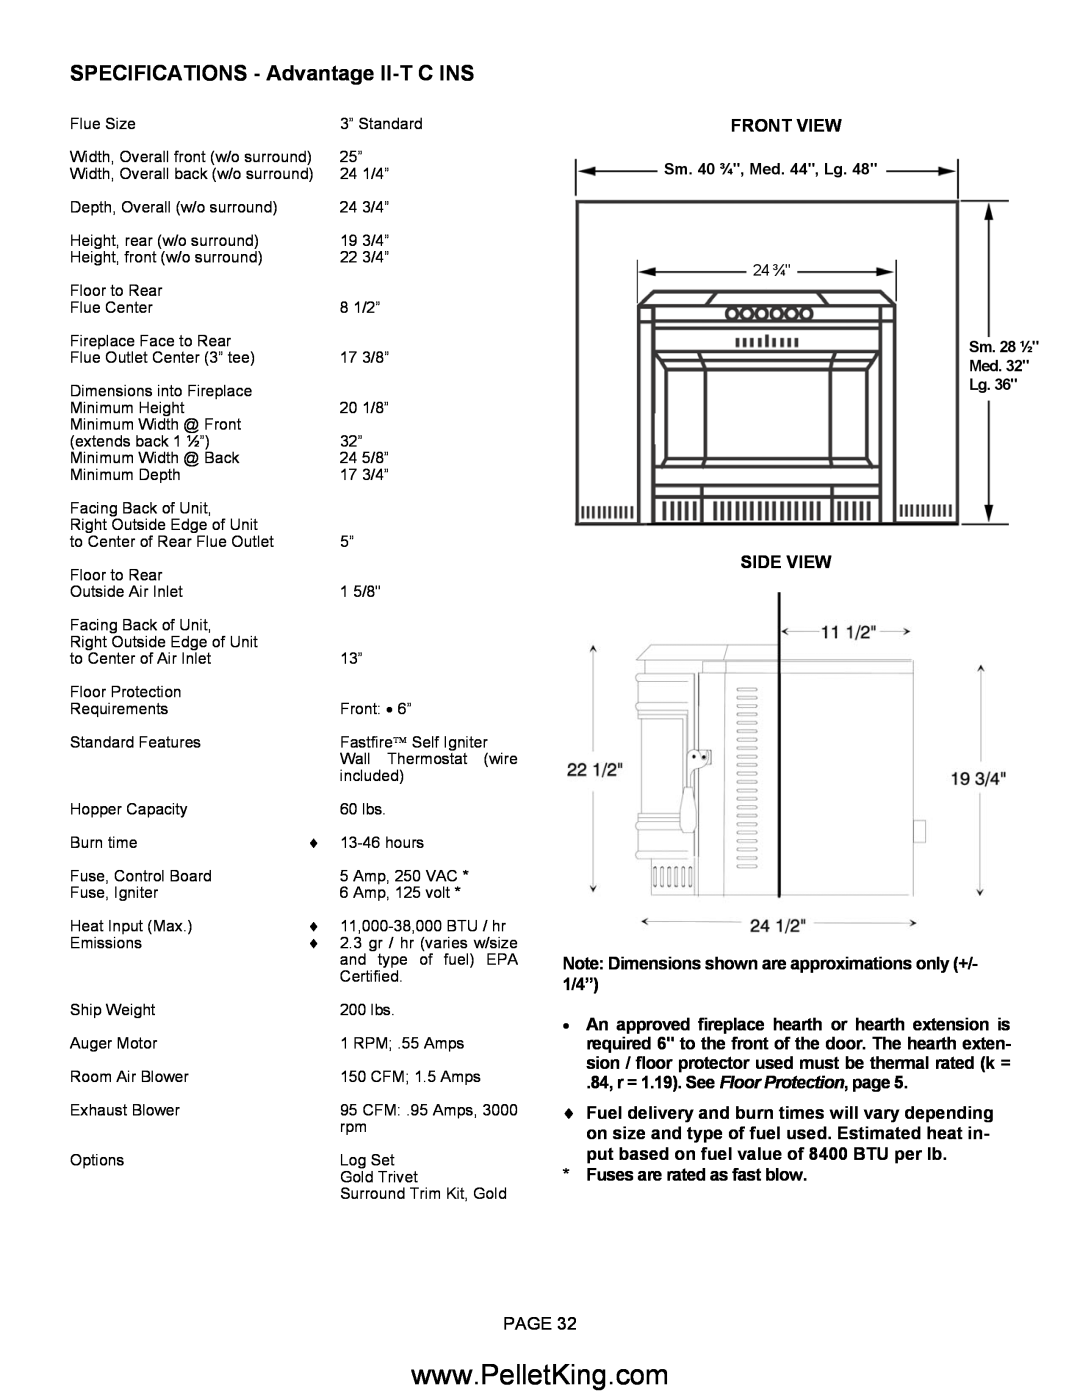 Lennox Hearth II-T C INS SPECIFICATIONS - Advantage II-TC INS, Front View, Side View, Fuses are rated as fast blow 